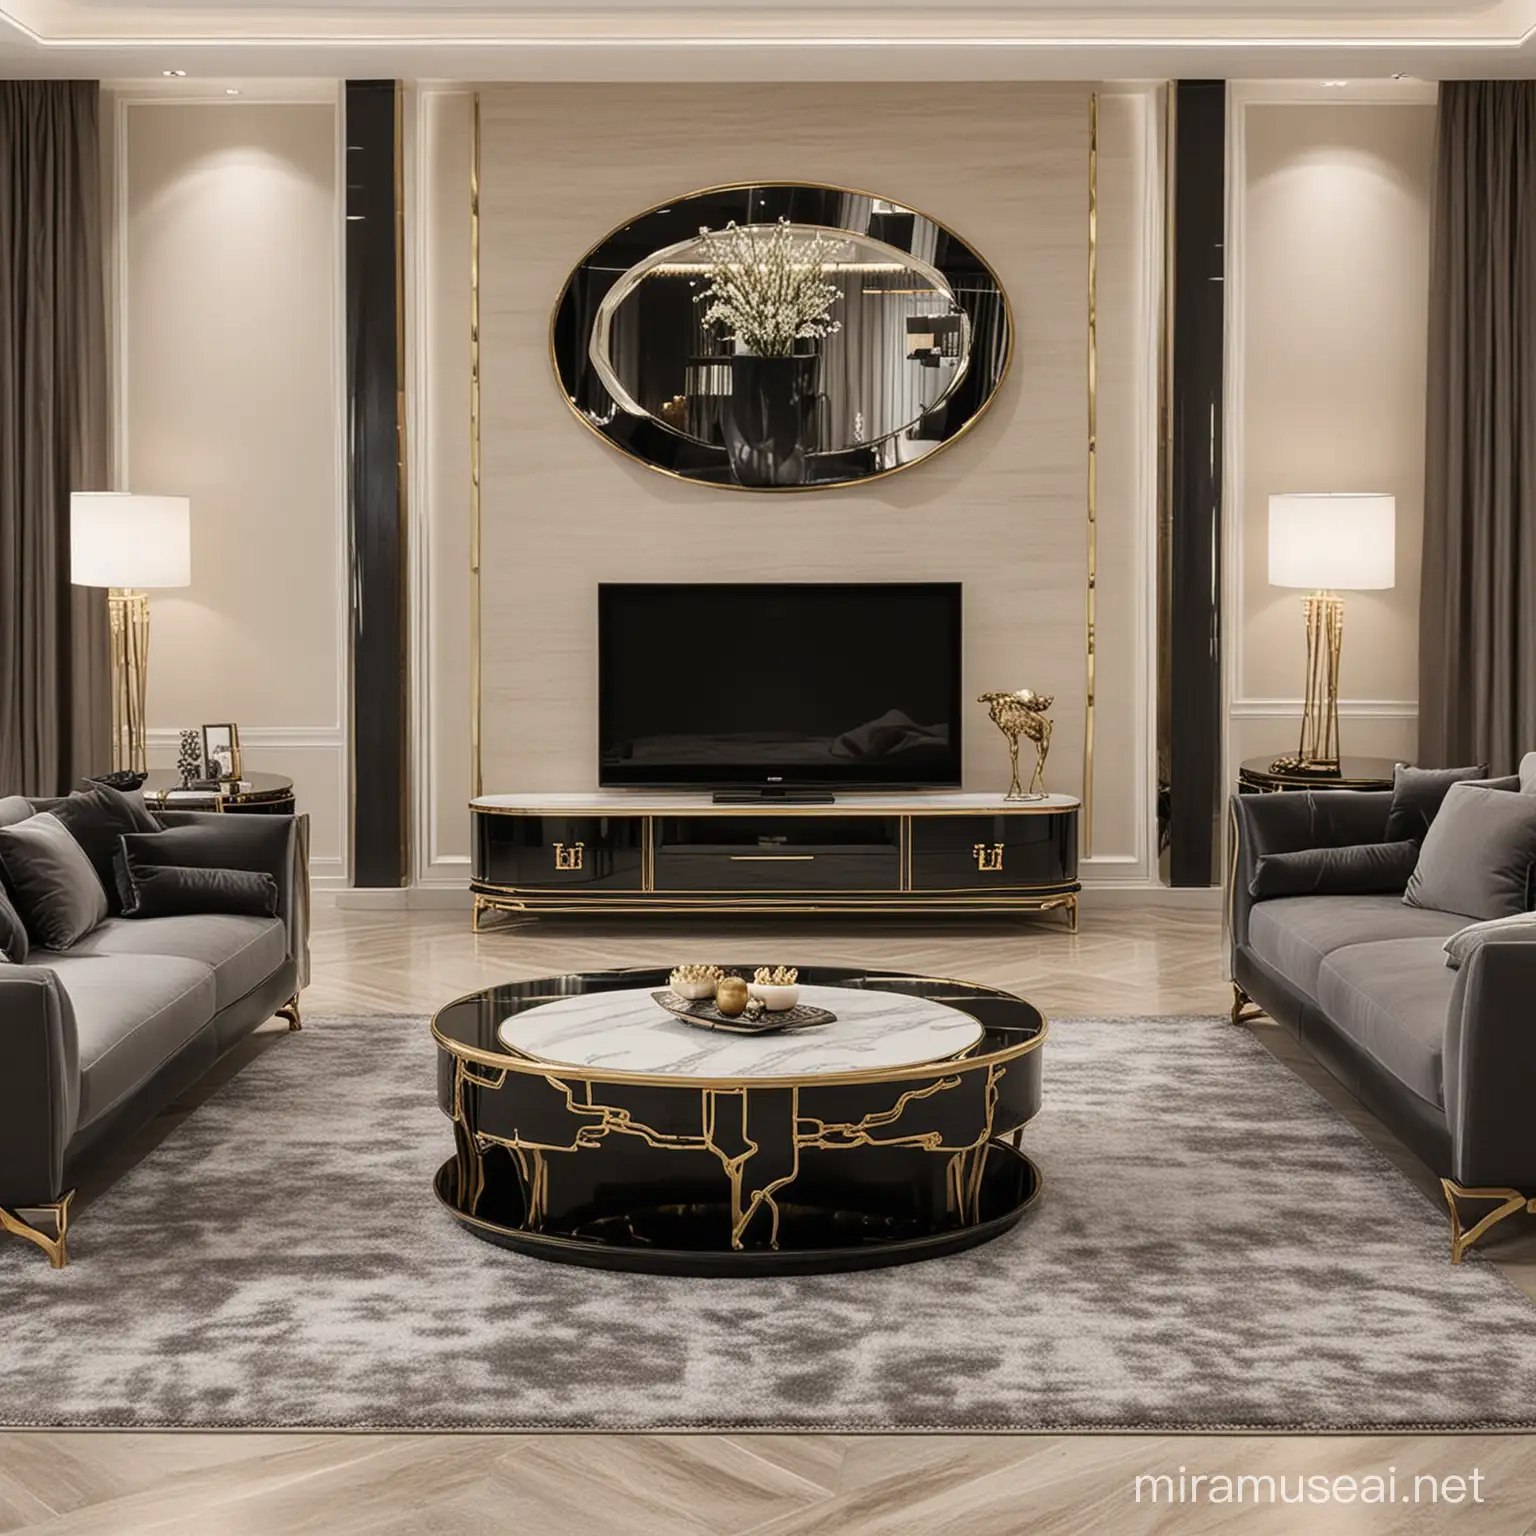 Luxury Oval Living Room Furniture Set with Big TV and Black Accents